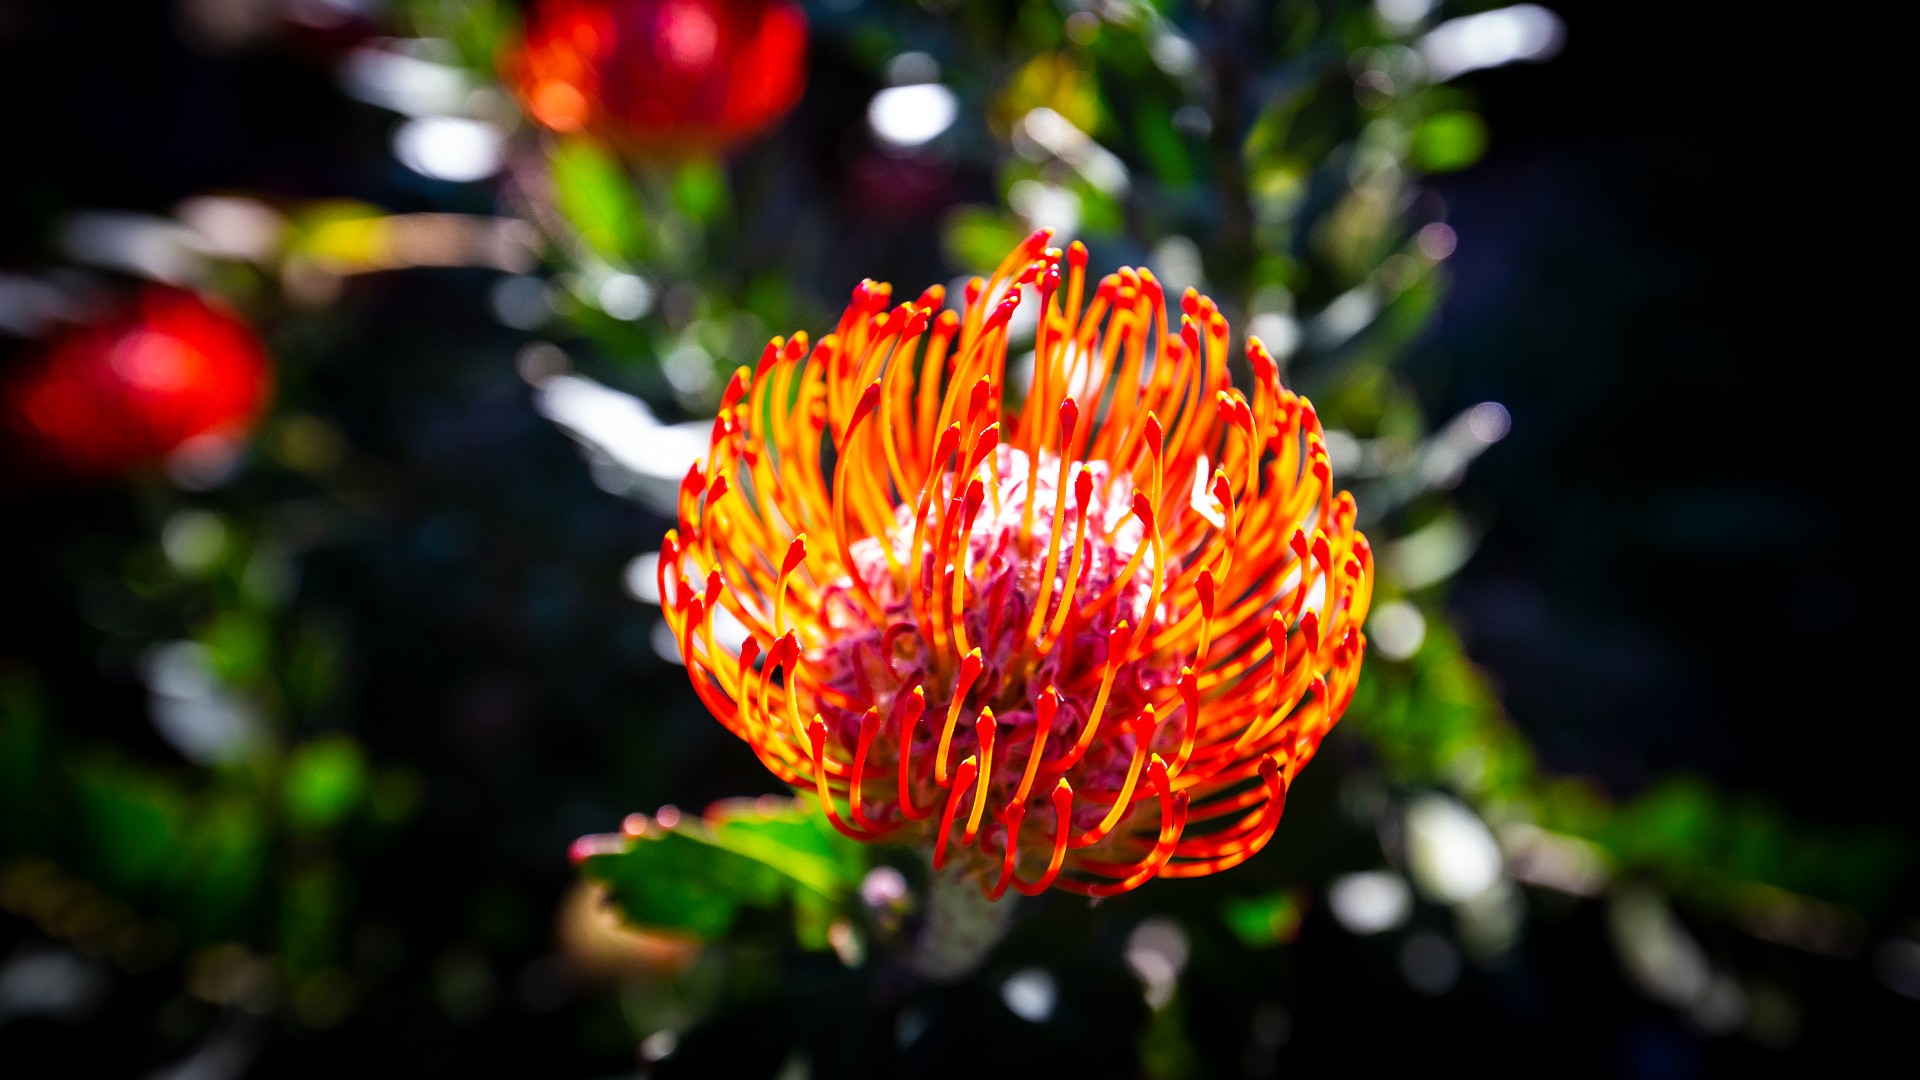 A vibrant orange banksia sits among a sea of green leaves, in an image from UOW's Wollongong Campus. Photo: Paul Jones